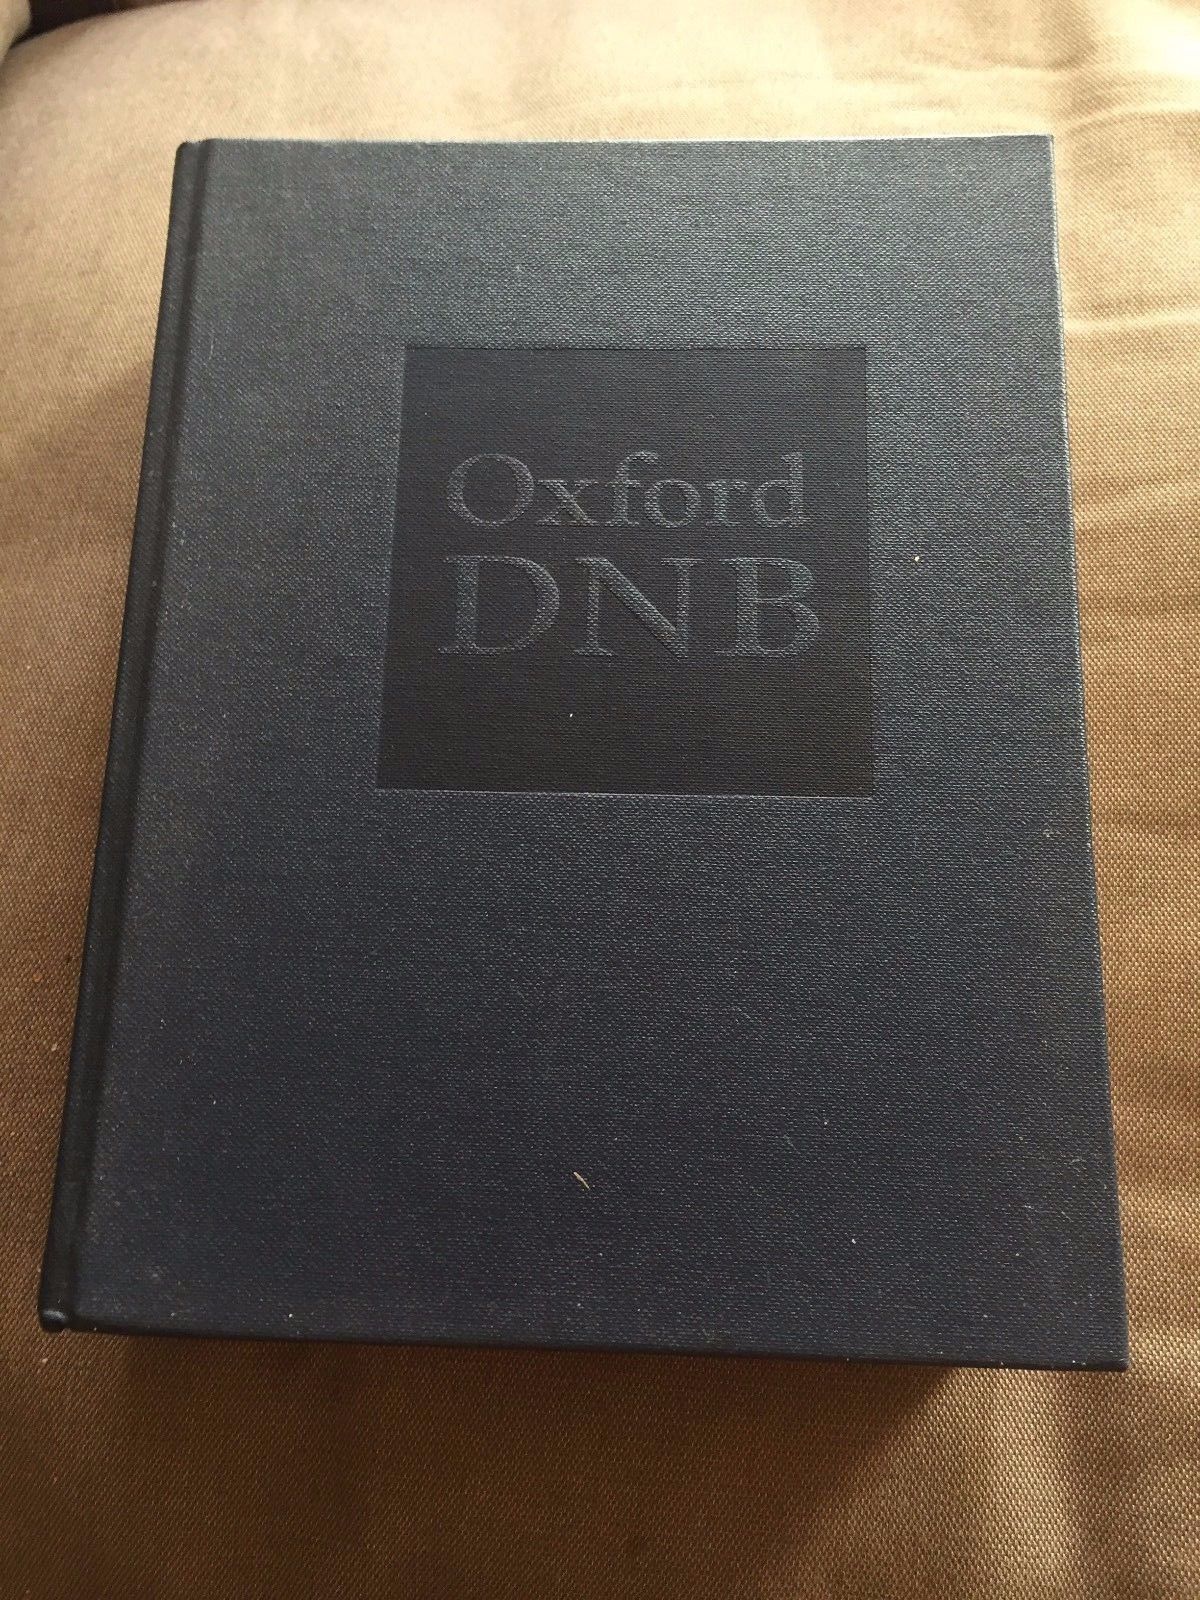 the oxford dictionary of national biography